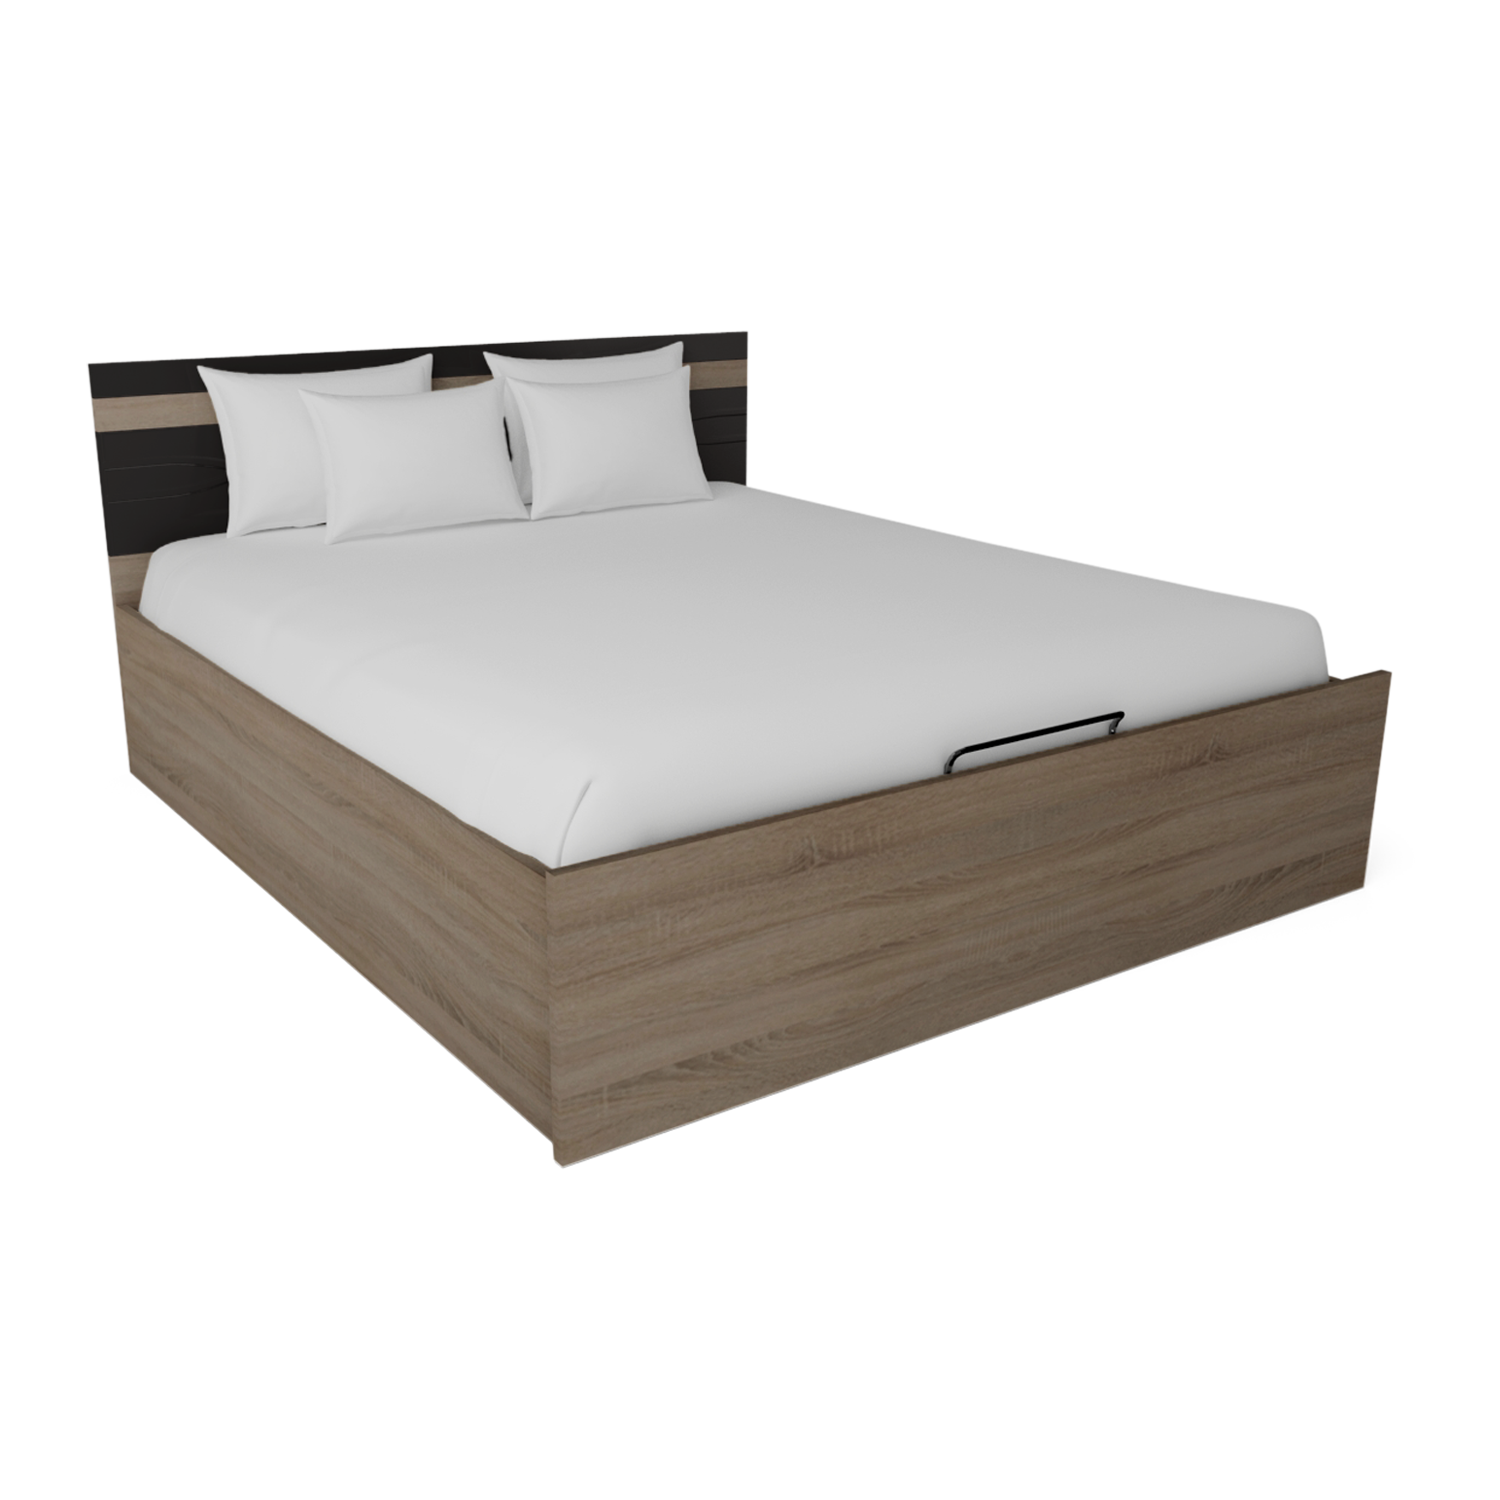 Zen King Size Bed With Hydraulic, King Size Bed With Storage Headboard